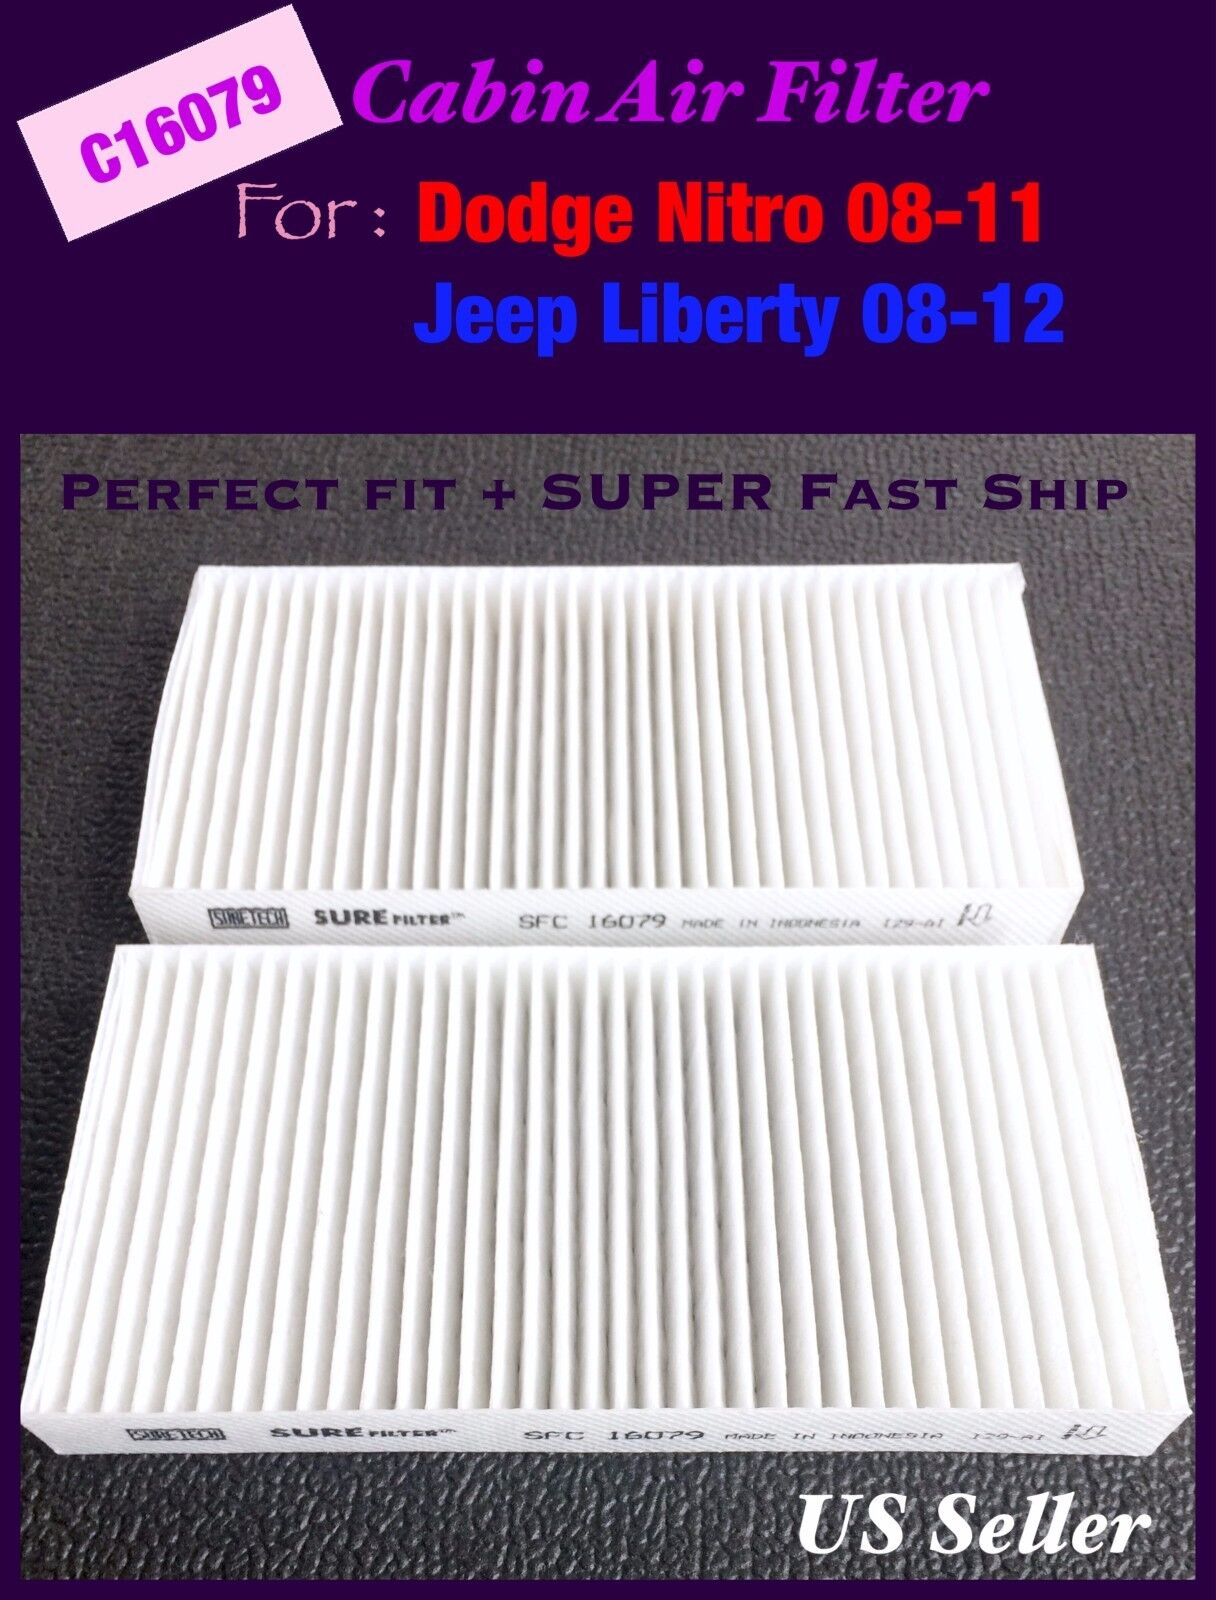 Cabin Air Filter For Jeep Liberty 08-12  Dodge Nitro 08-11 C16079 Perfect Fit 